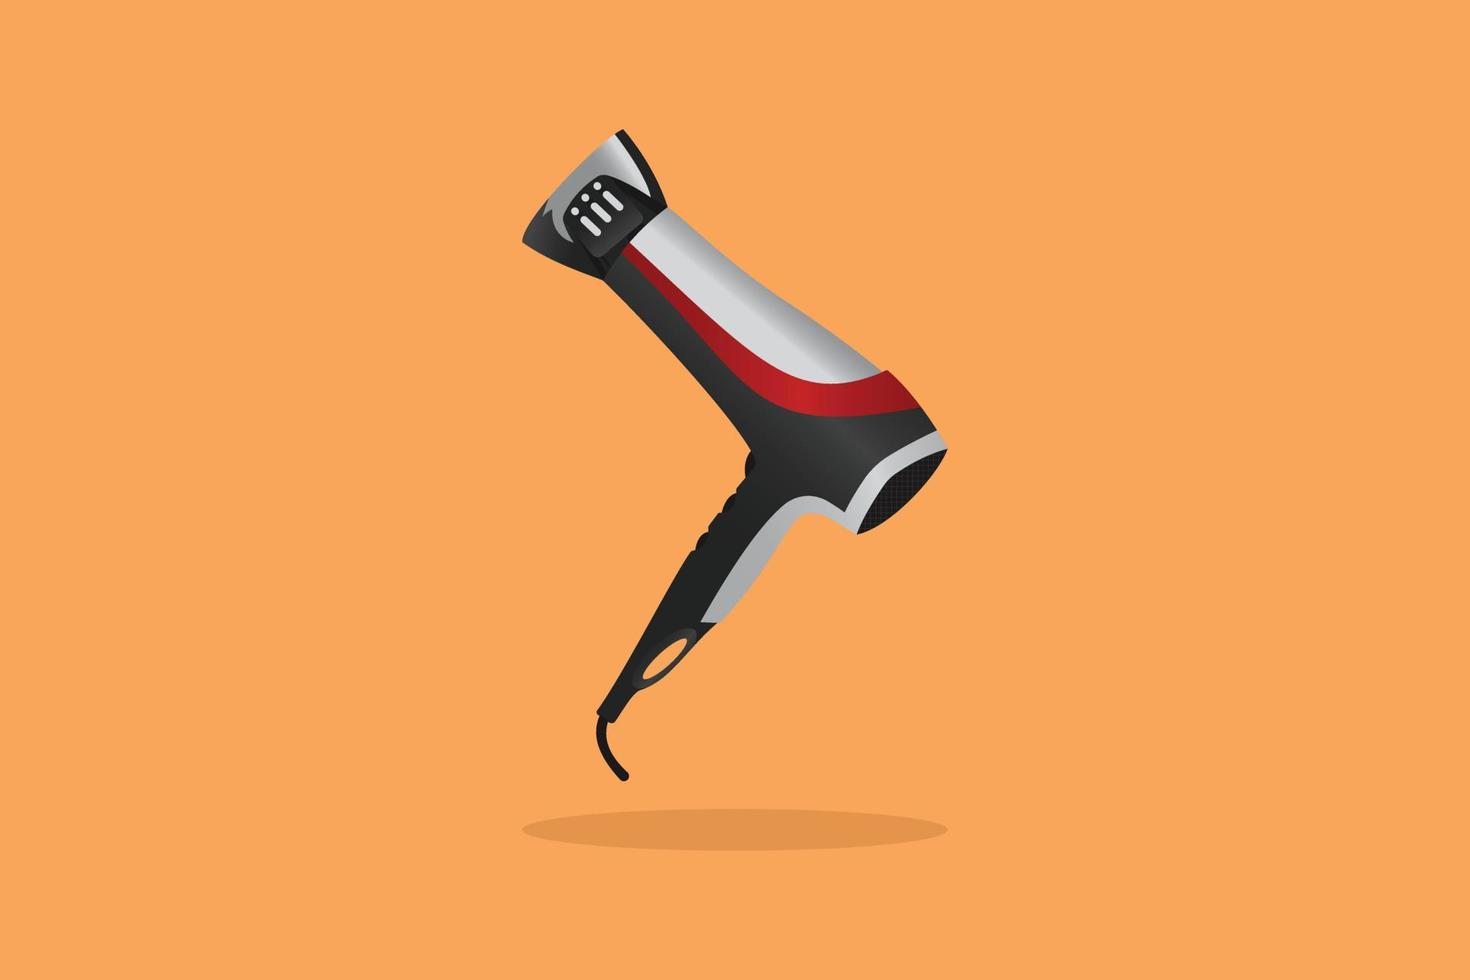 Colorful Hair Dryer machine vector icon illustration. Barber shop tools icon design concept. Blow dryer, Hair care, Hair dresser tools, Electronic machine, Shop equipment, Beauty and fashion, Saloon.